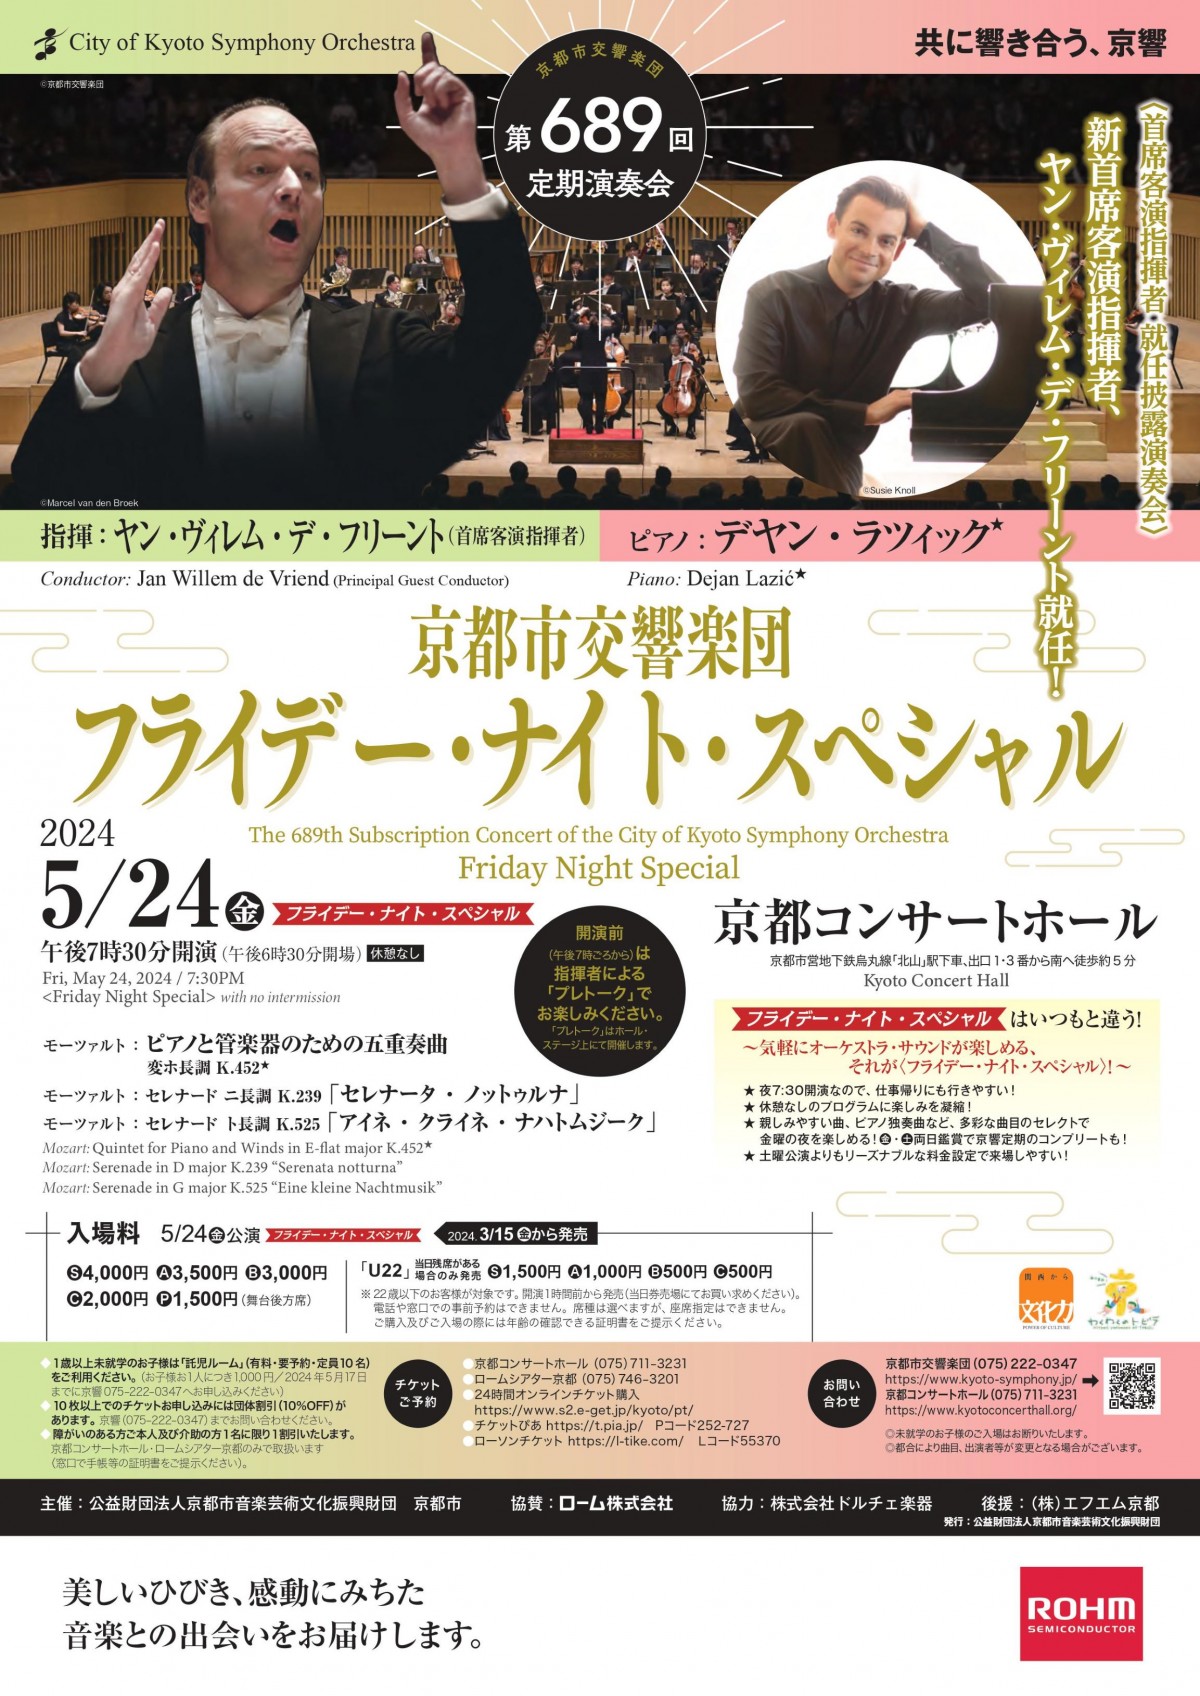 The 689th Subscription Concert
《Friday Night Special》